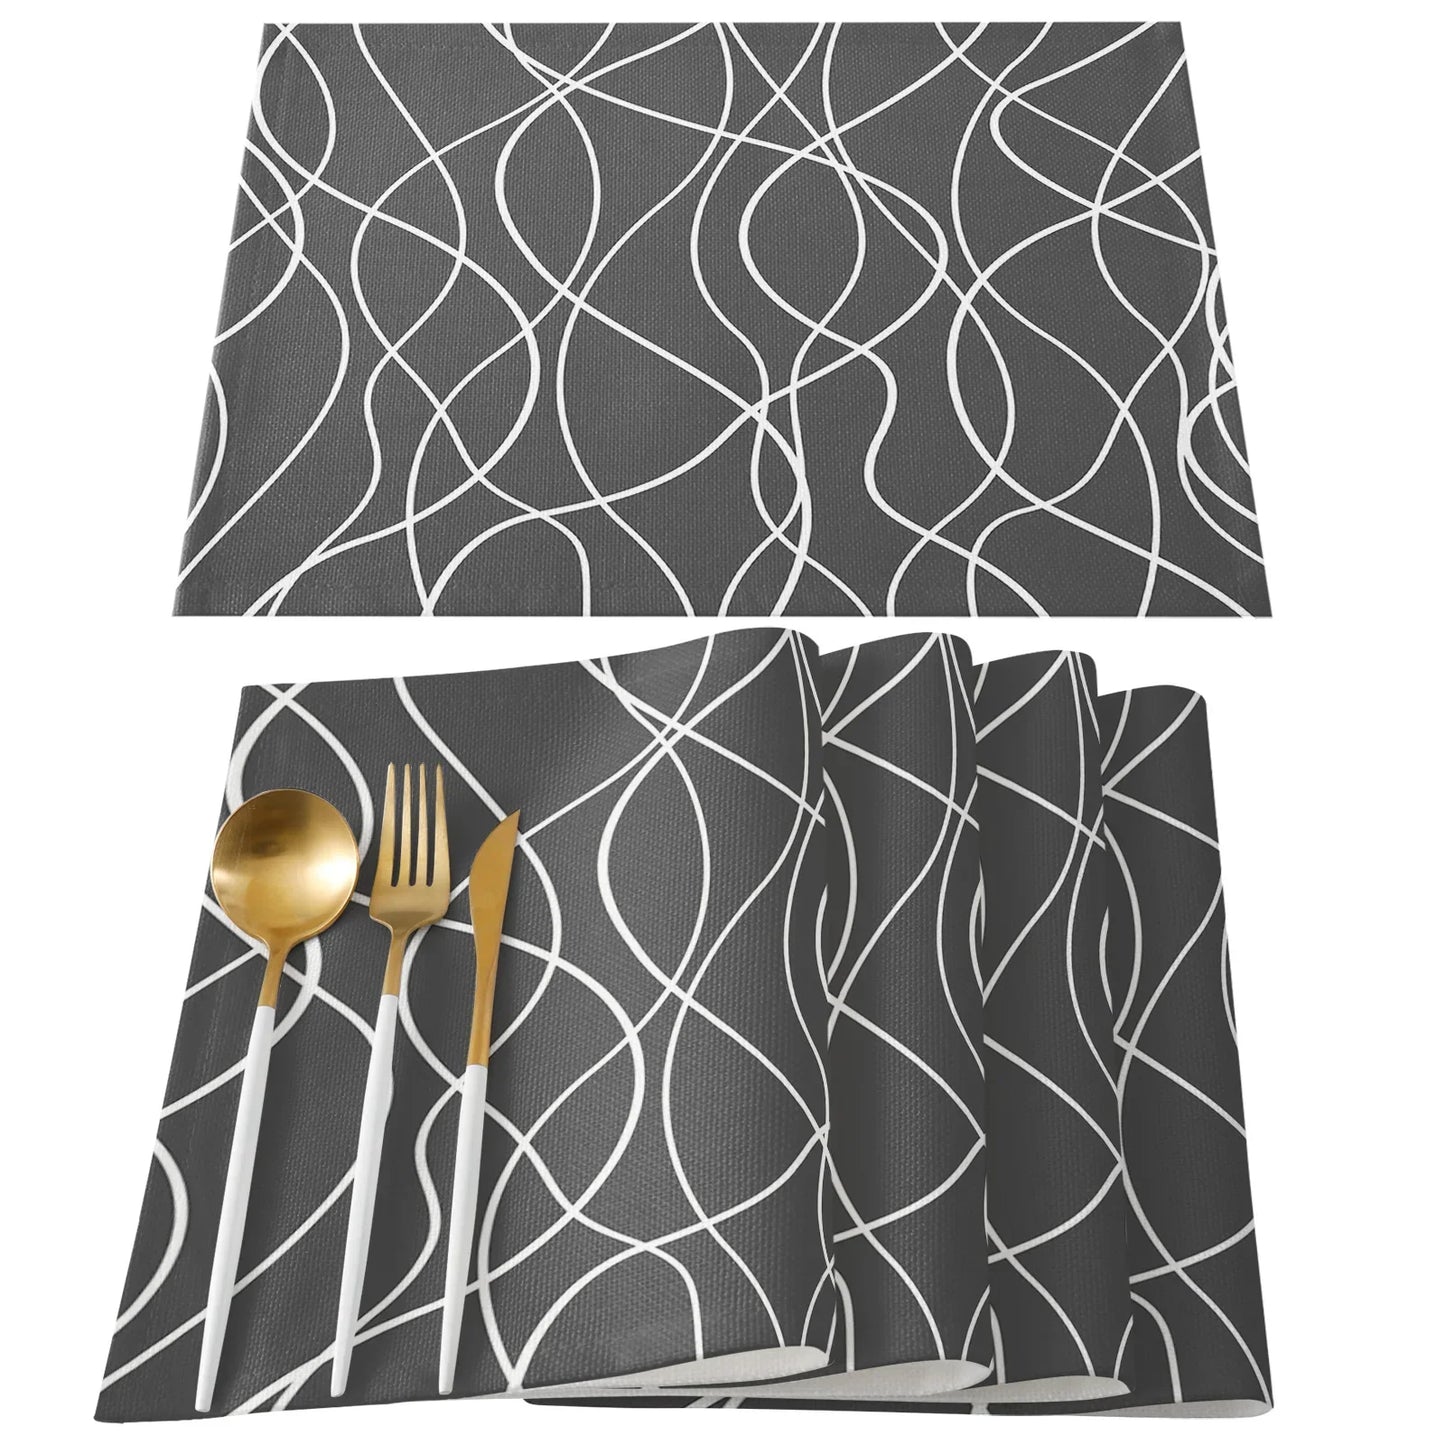 Modern Art Black Placemat Set - Heat Resistant Linen Tableware Pads for Kitchen and Dining Table Décor